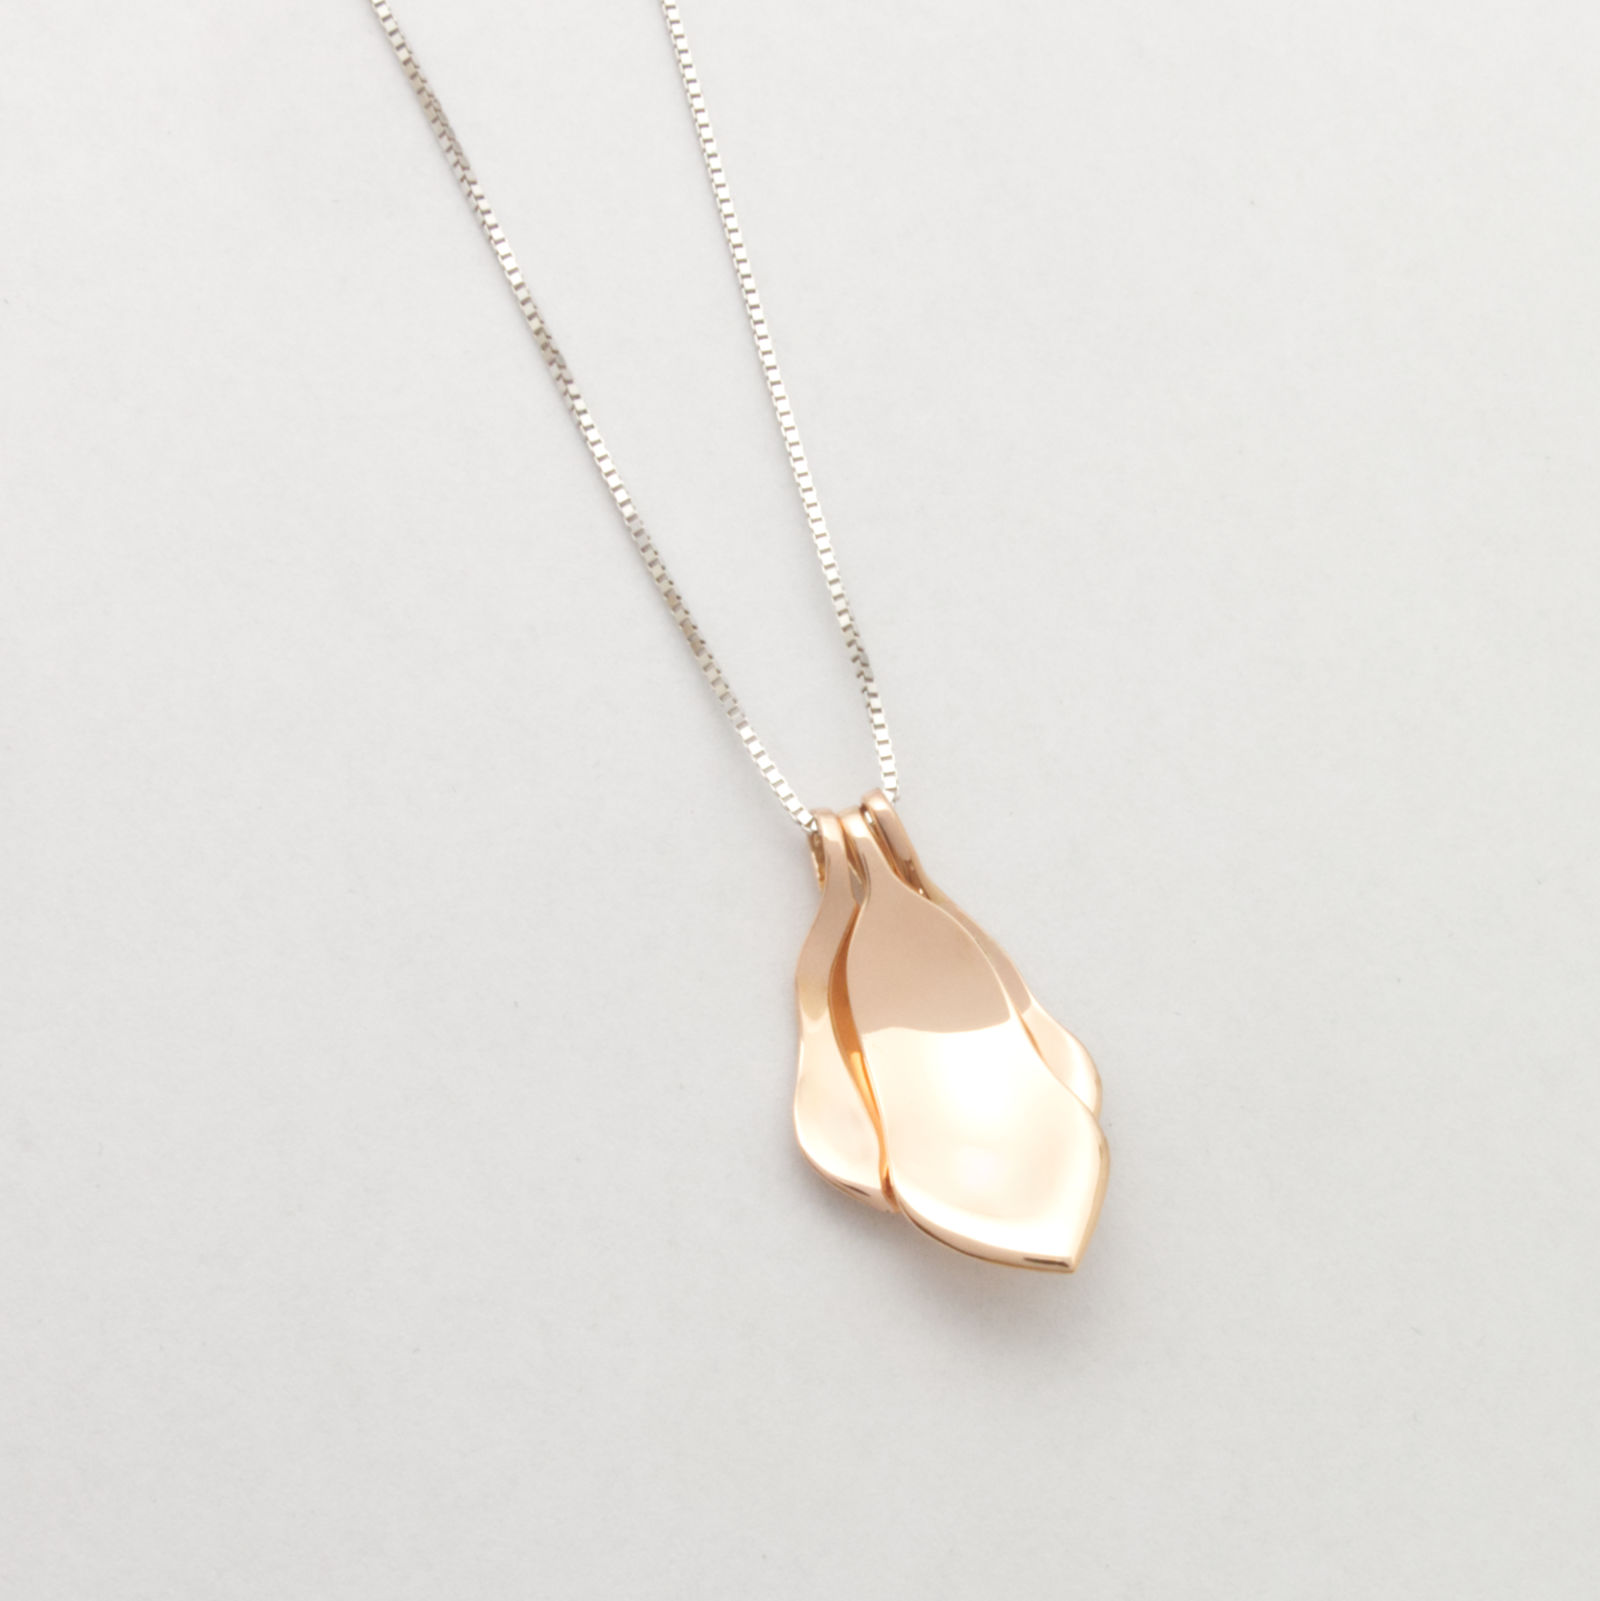 Handcrafted sustainable jewellery with memory of a magnolia tree..